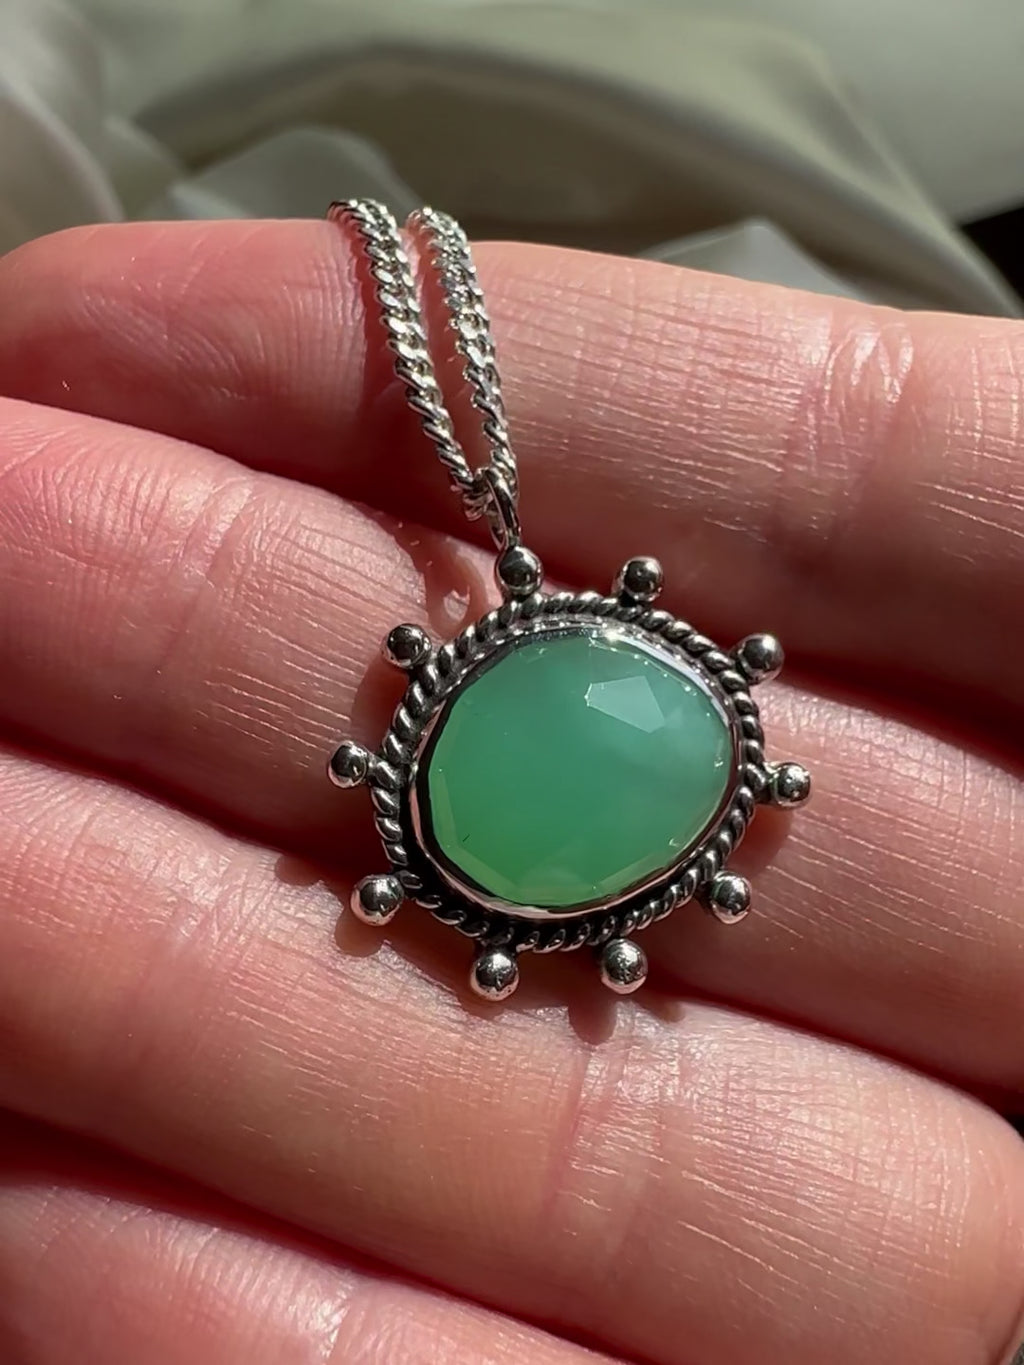 Handmade 925 sterling silver pendant with faceted chrysoprase stone affordable lily and William jewelry